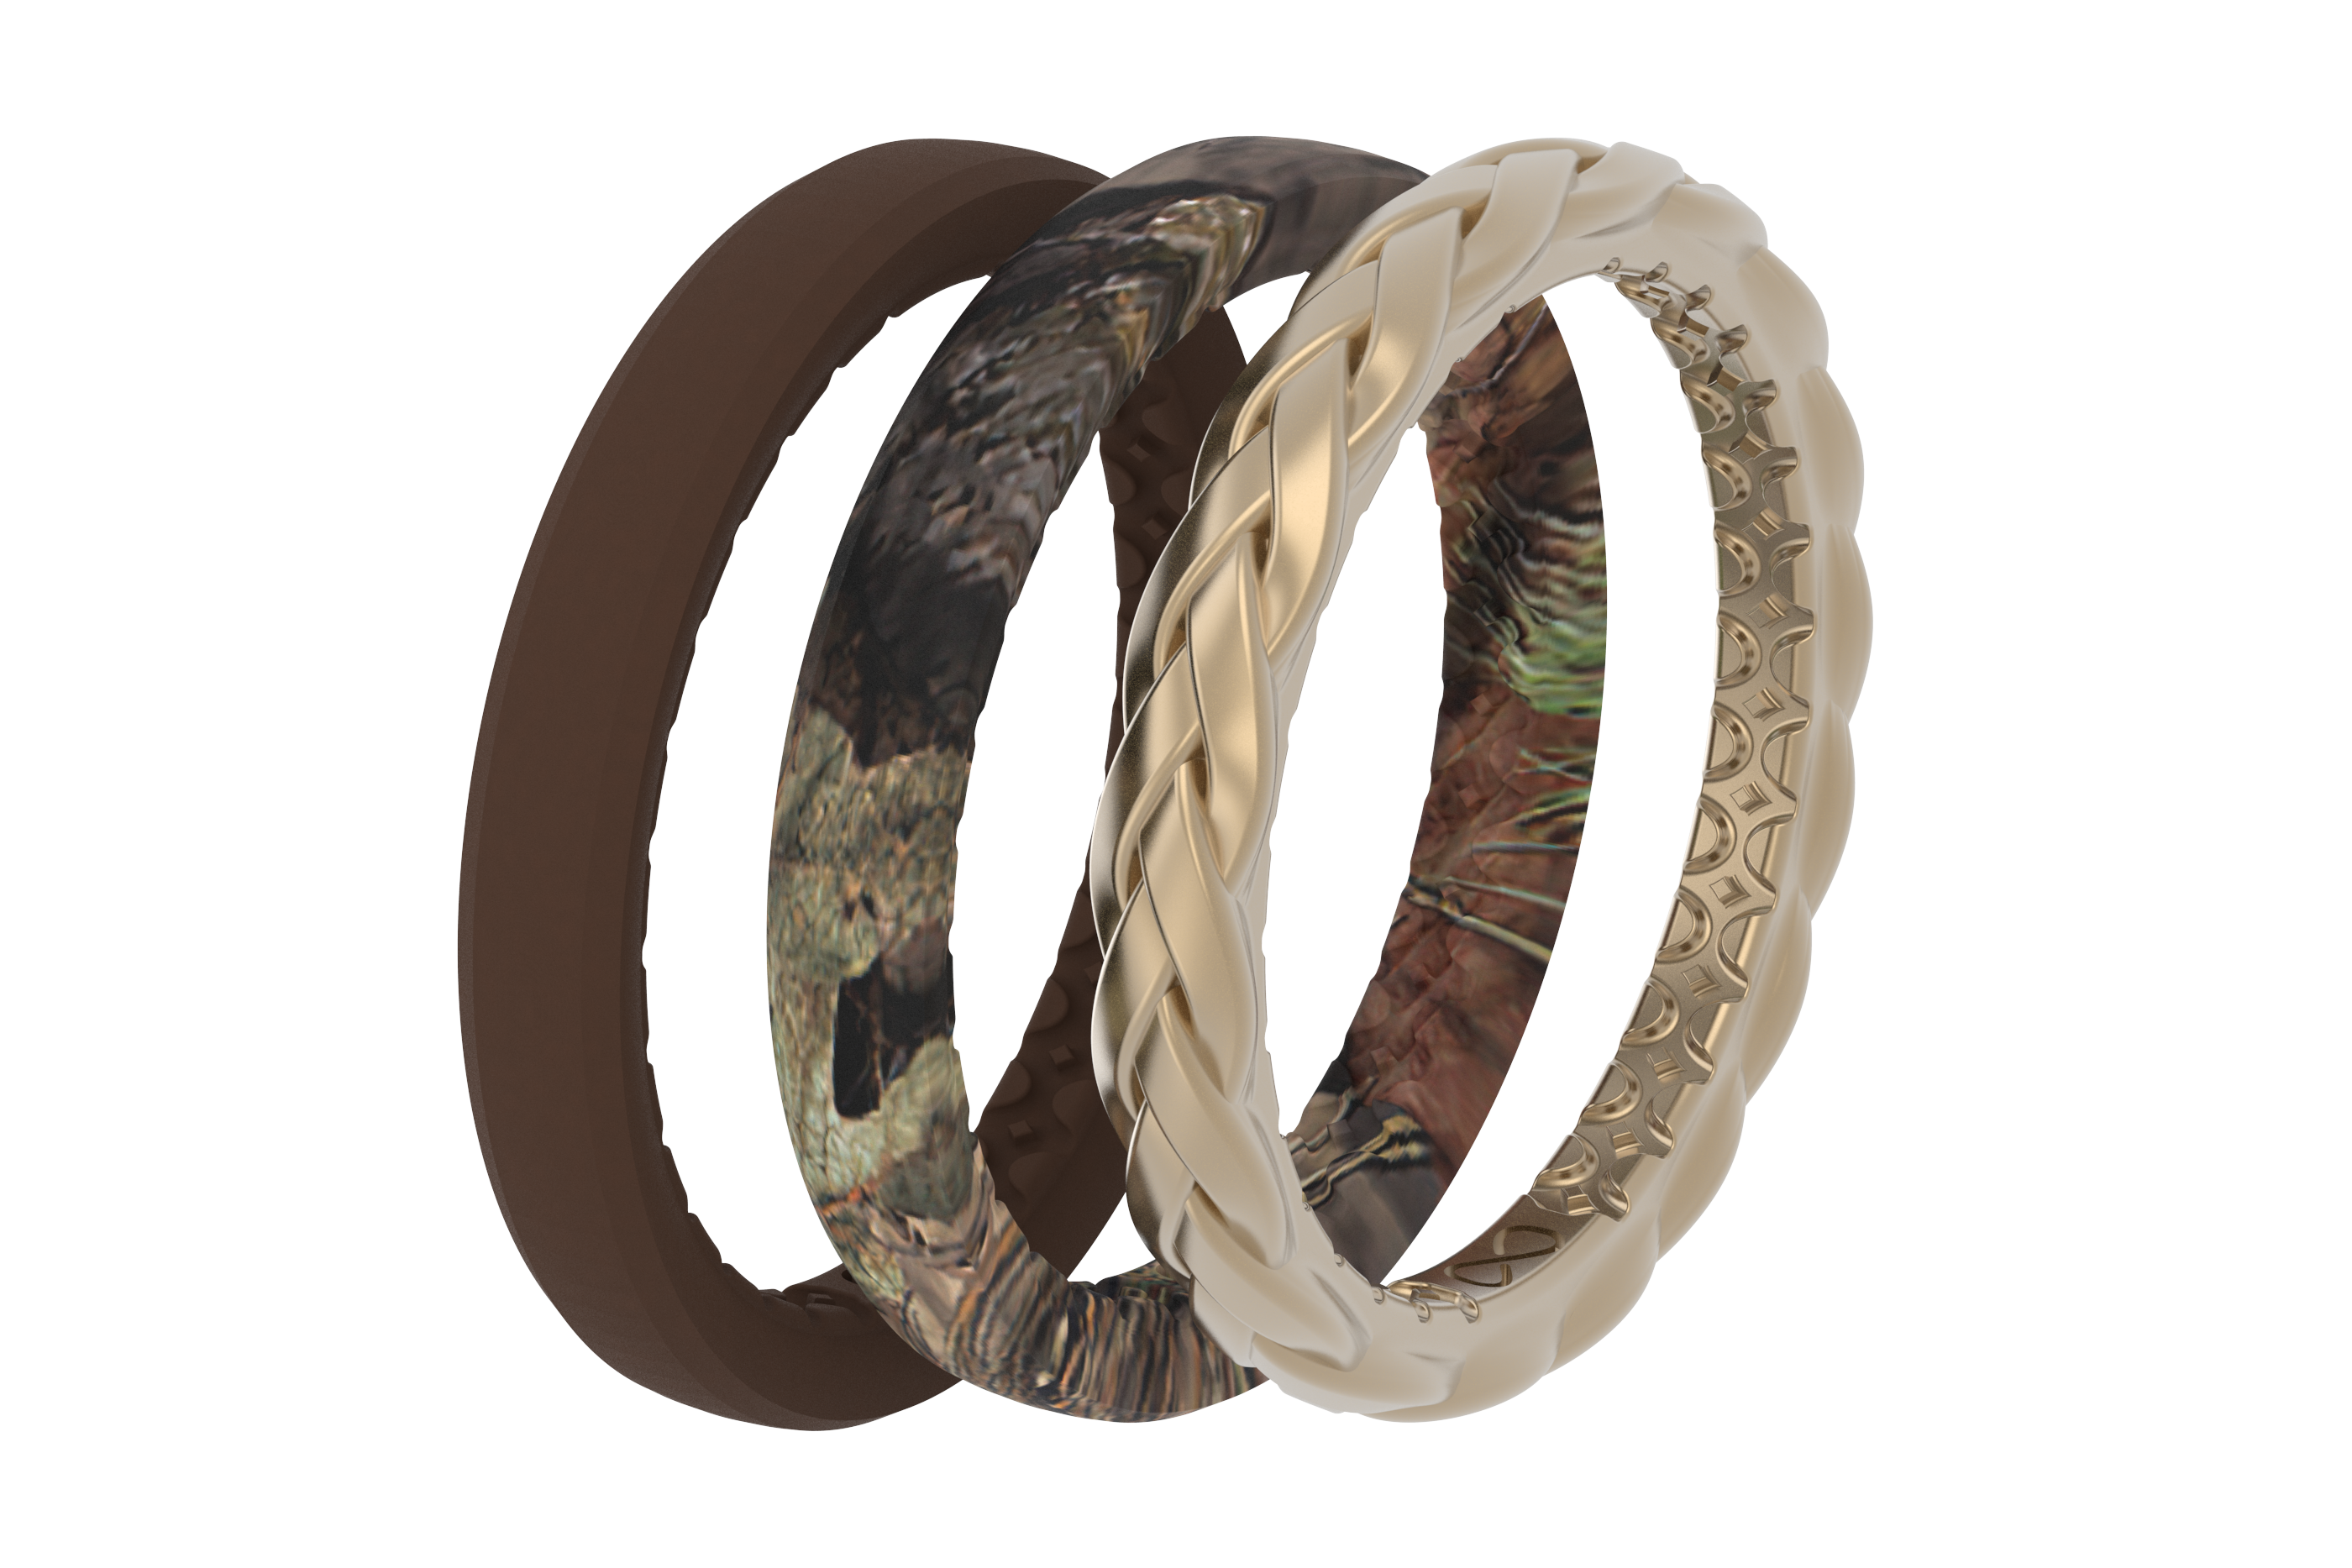 Mossy Oak® Breakup Country Stackable Rings viewed on its side